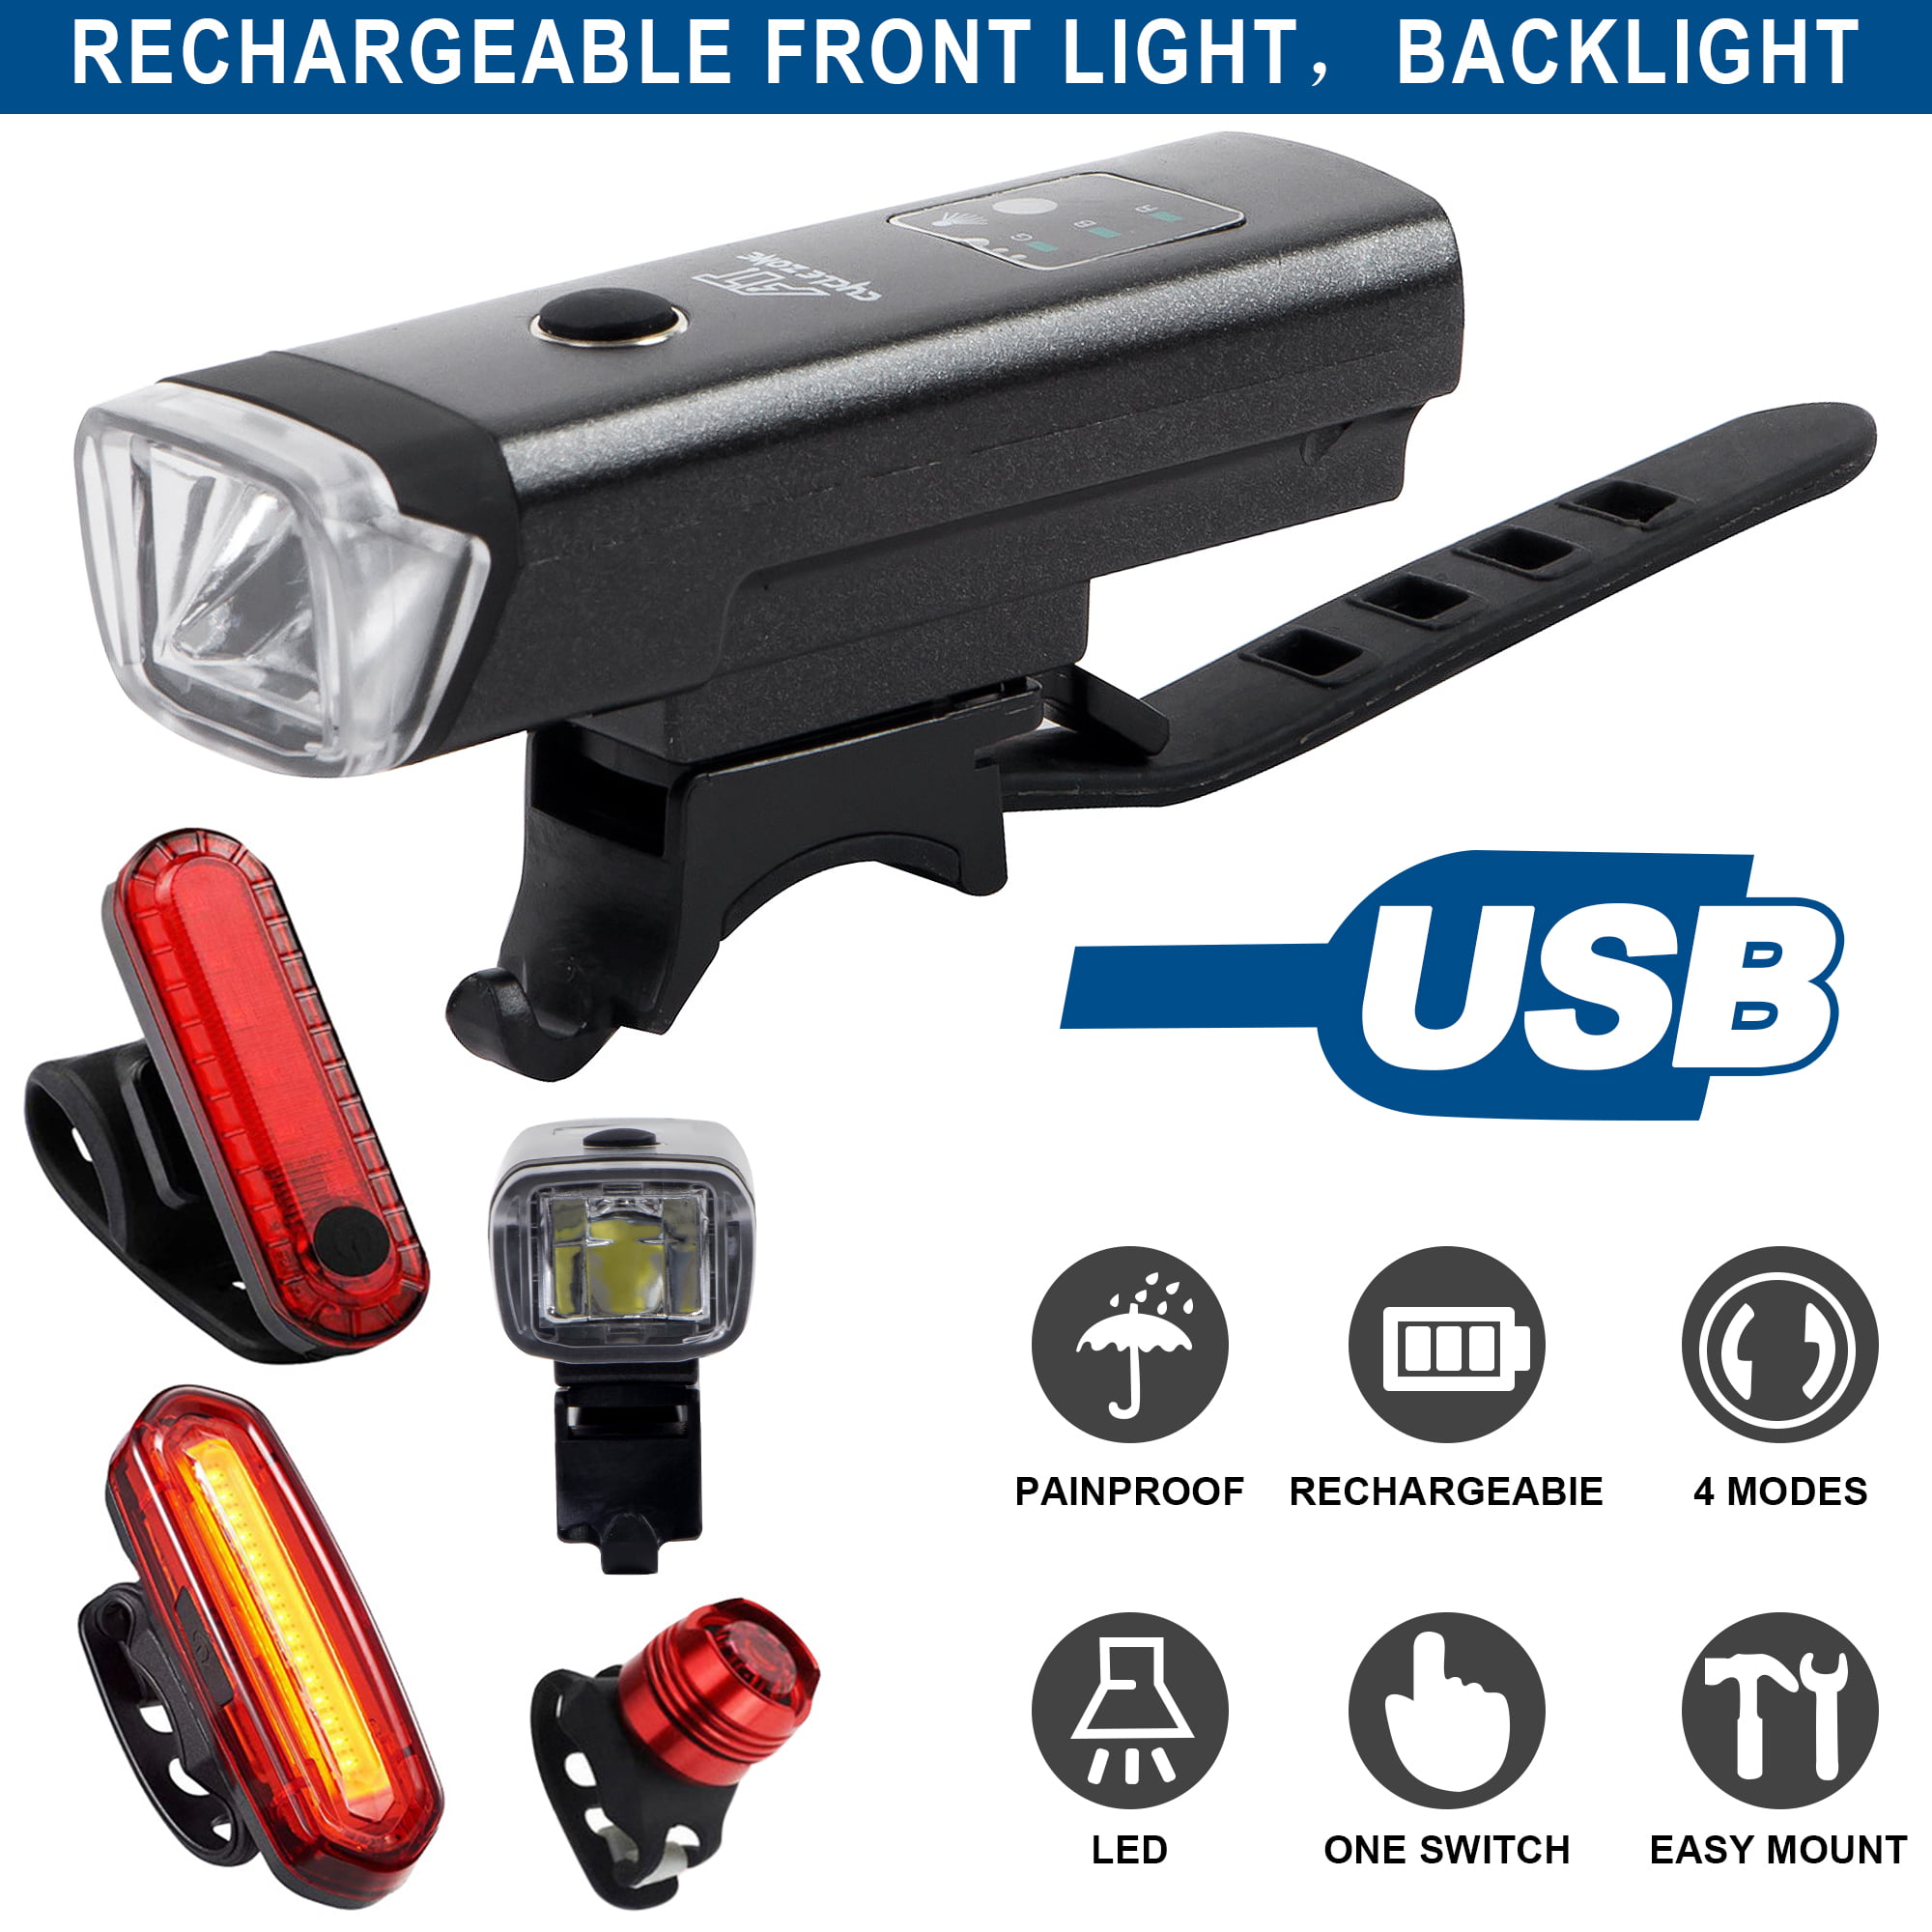 Super Bright USB Led Bike Bicycle Light Rechargeable Headlight & Taillight Set 